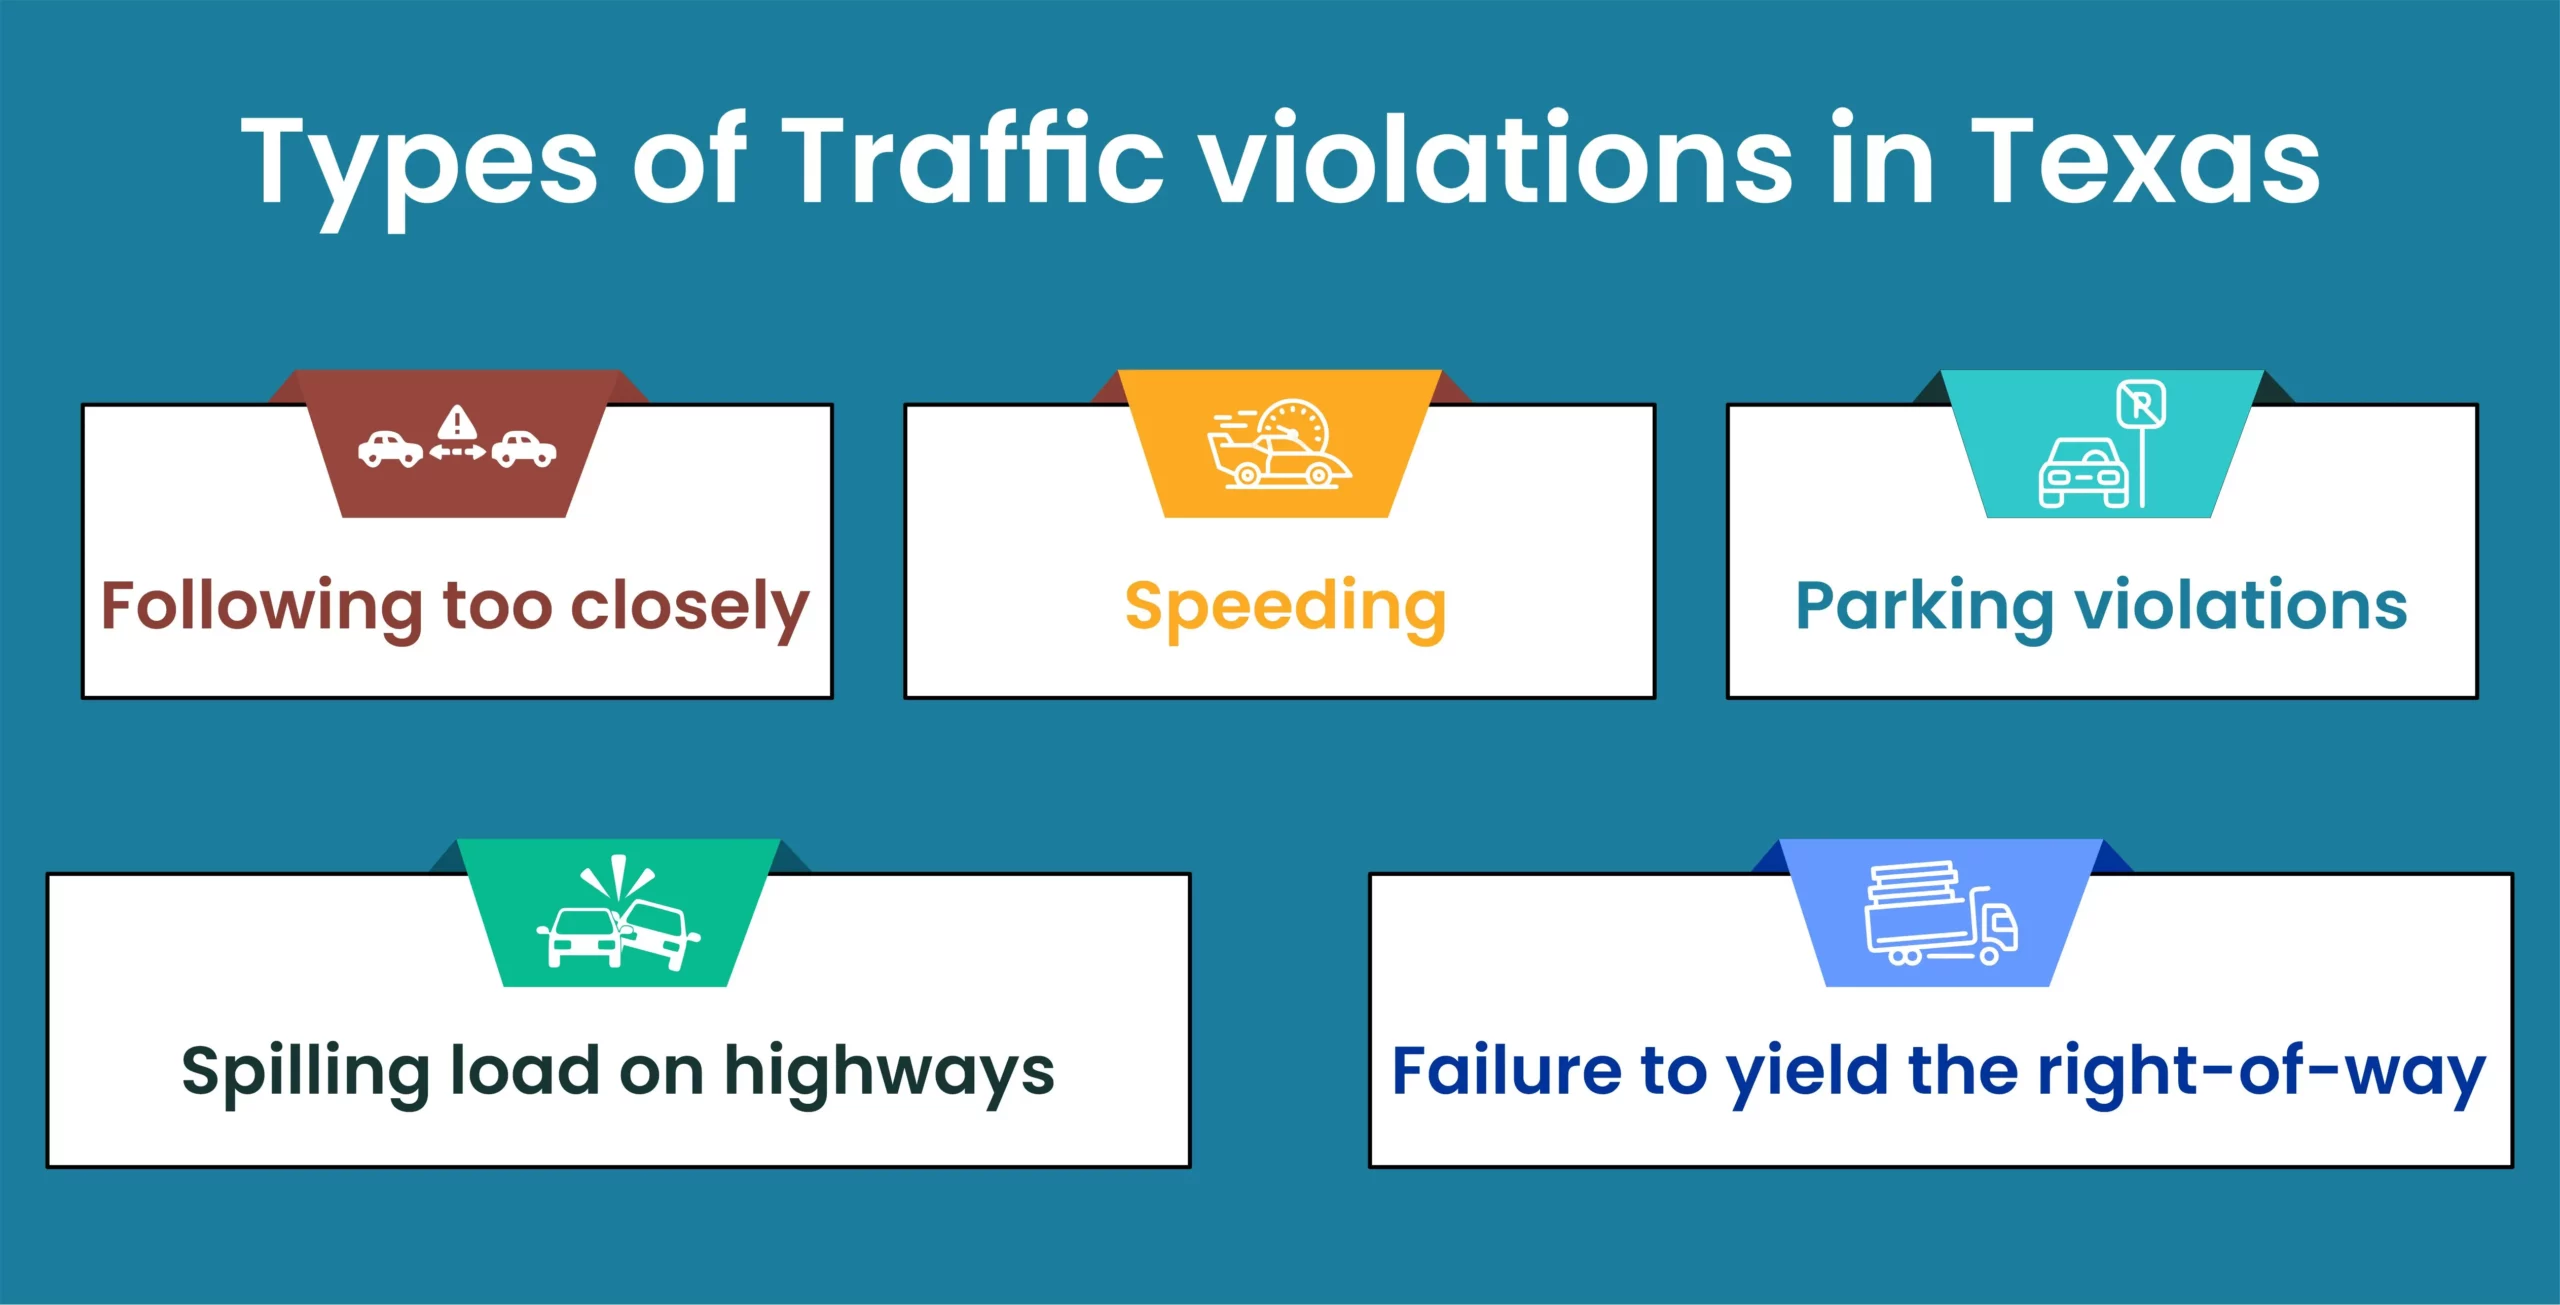 Types of Traffic Violation in Texas